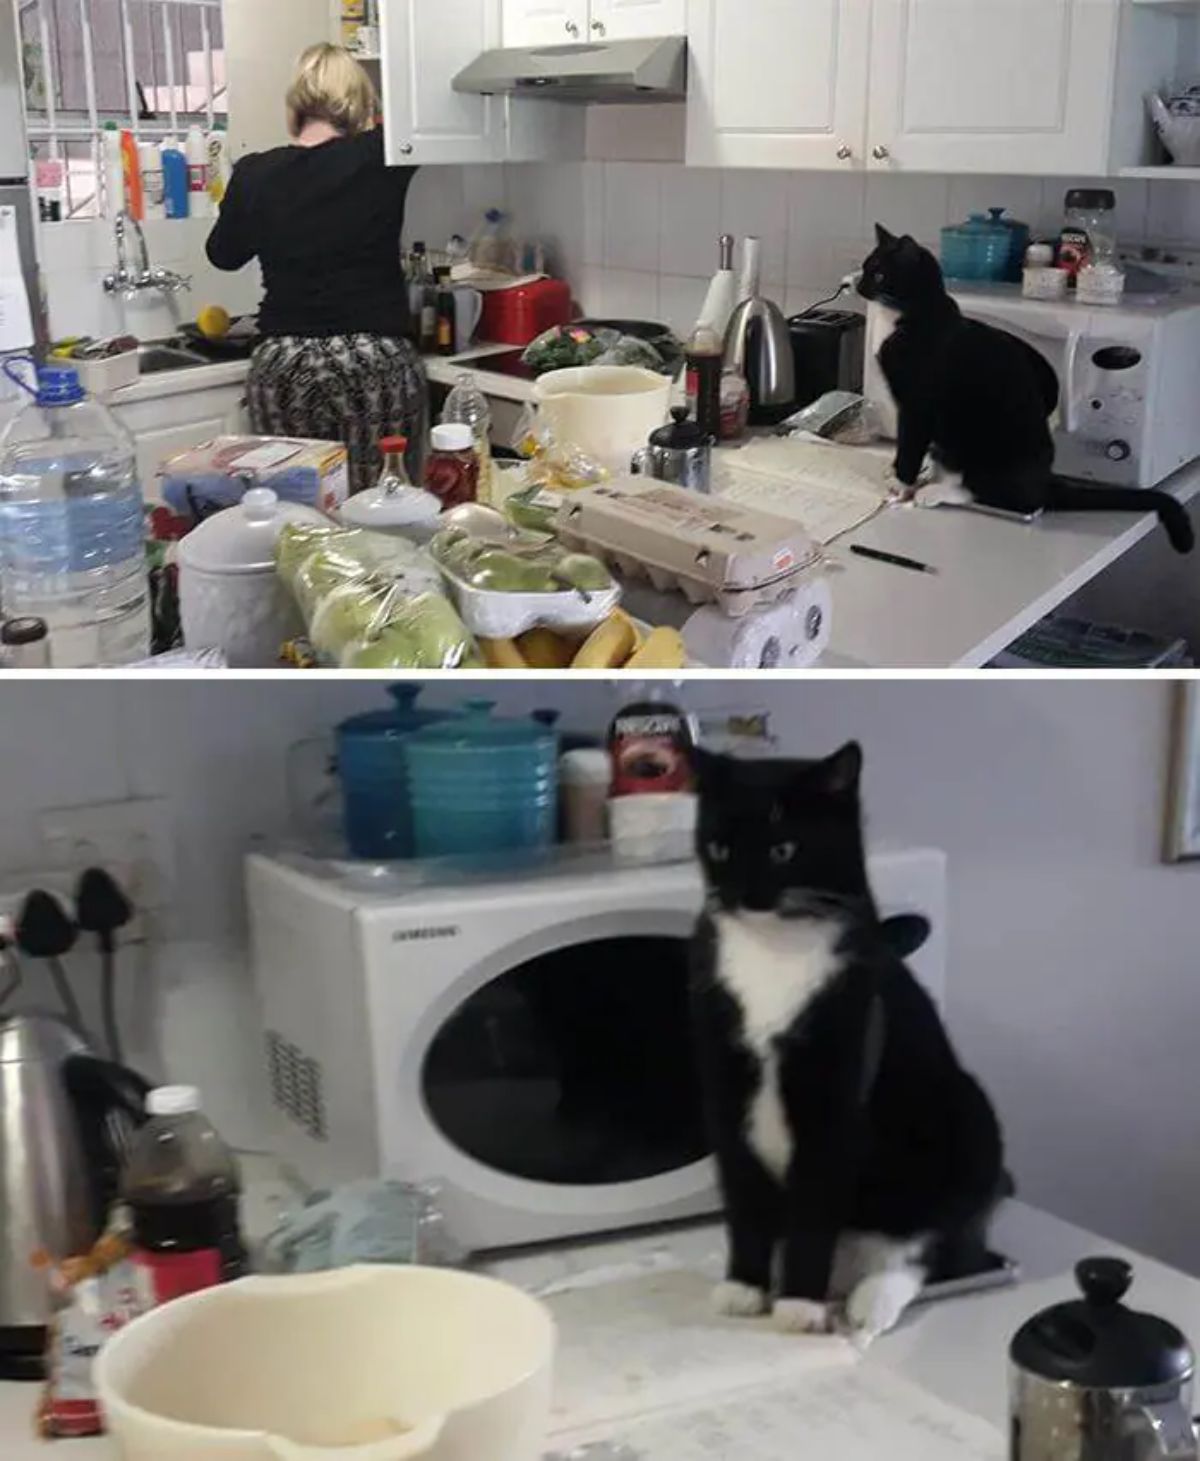 2 photos of a black and white cat sitting on a kitchen counter